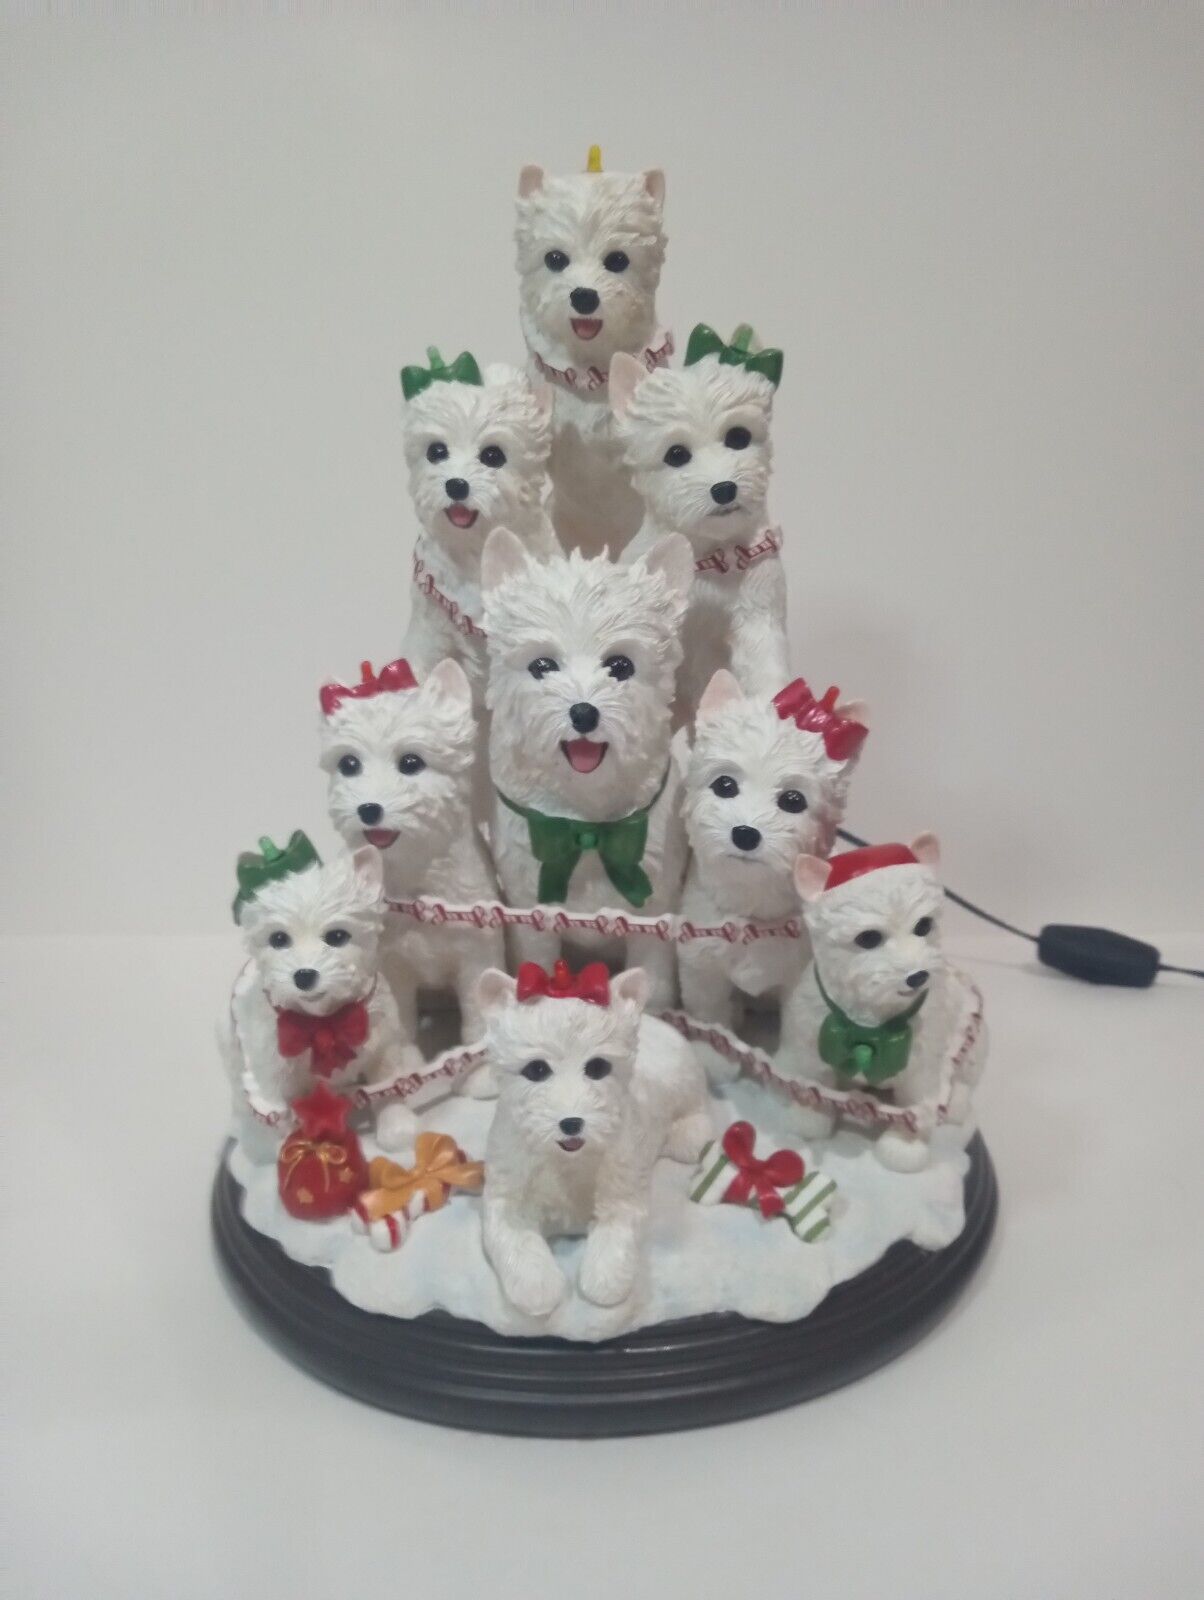 The Westie Family Christmas Tree From The Danbury Mint (Read Description)